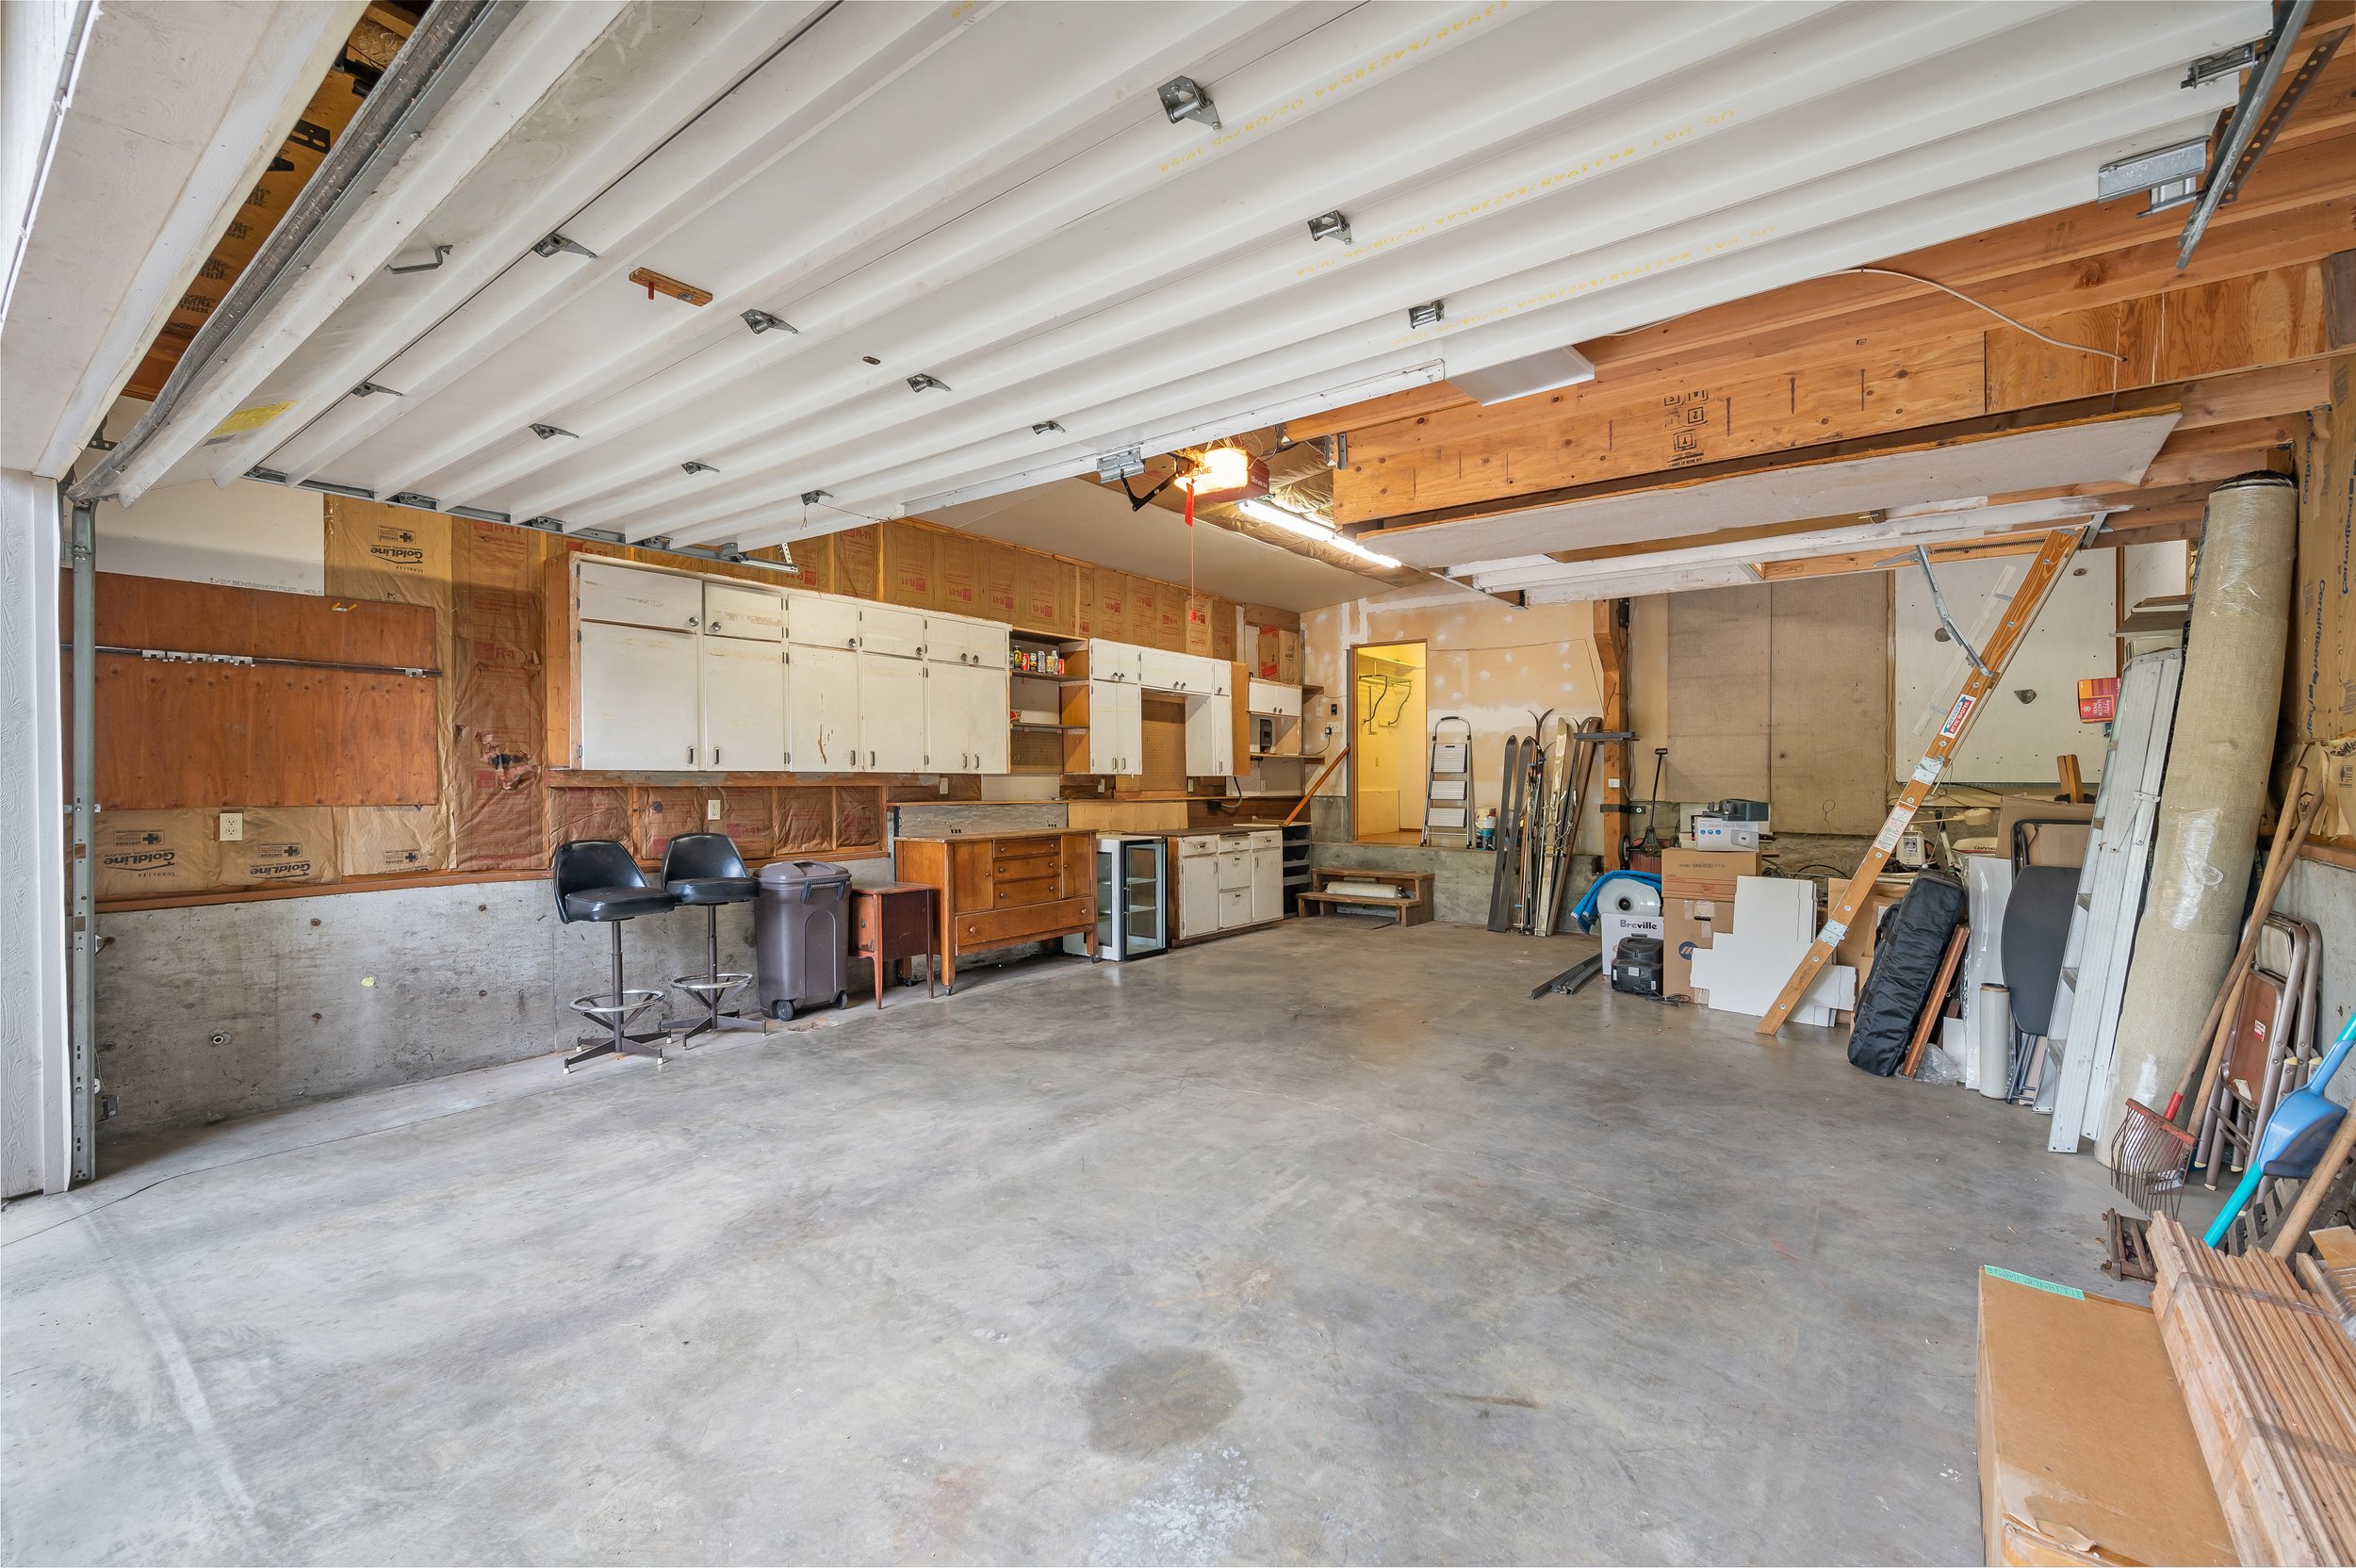  interior of garage with cabinets, storage and work station 